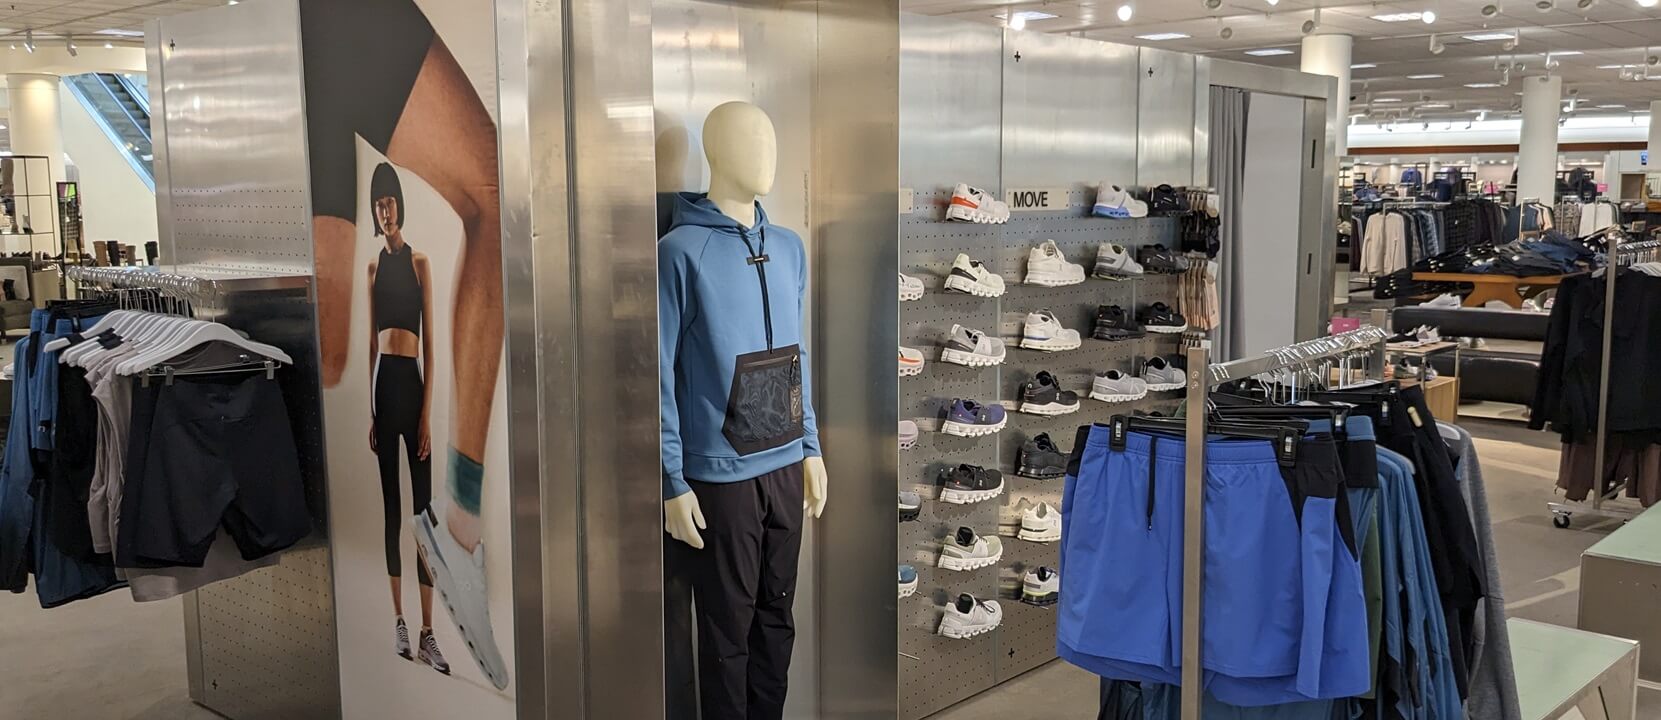 ON Running display inside Nordstrom Store that showcases men's shoes and apparel and women's apparel and installed by Nationwide Fixture Installations NFI.